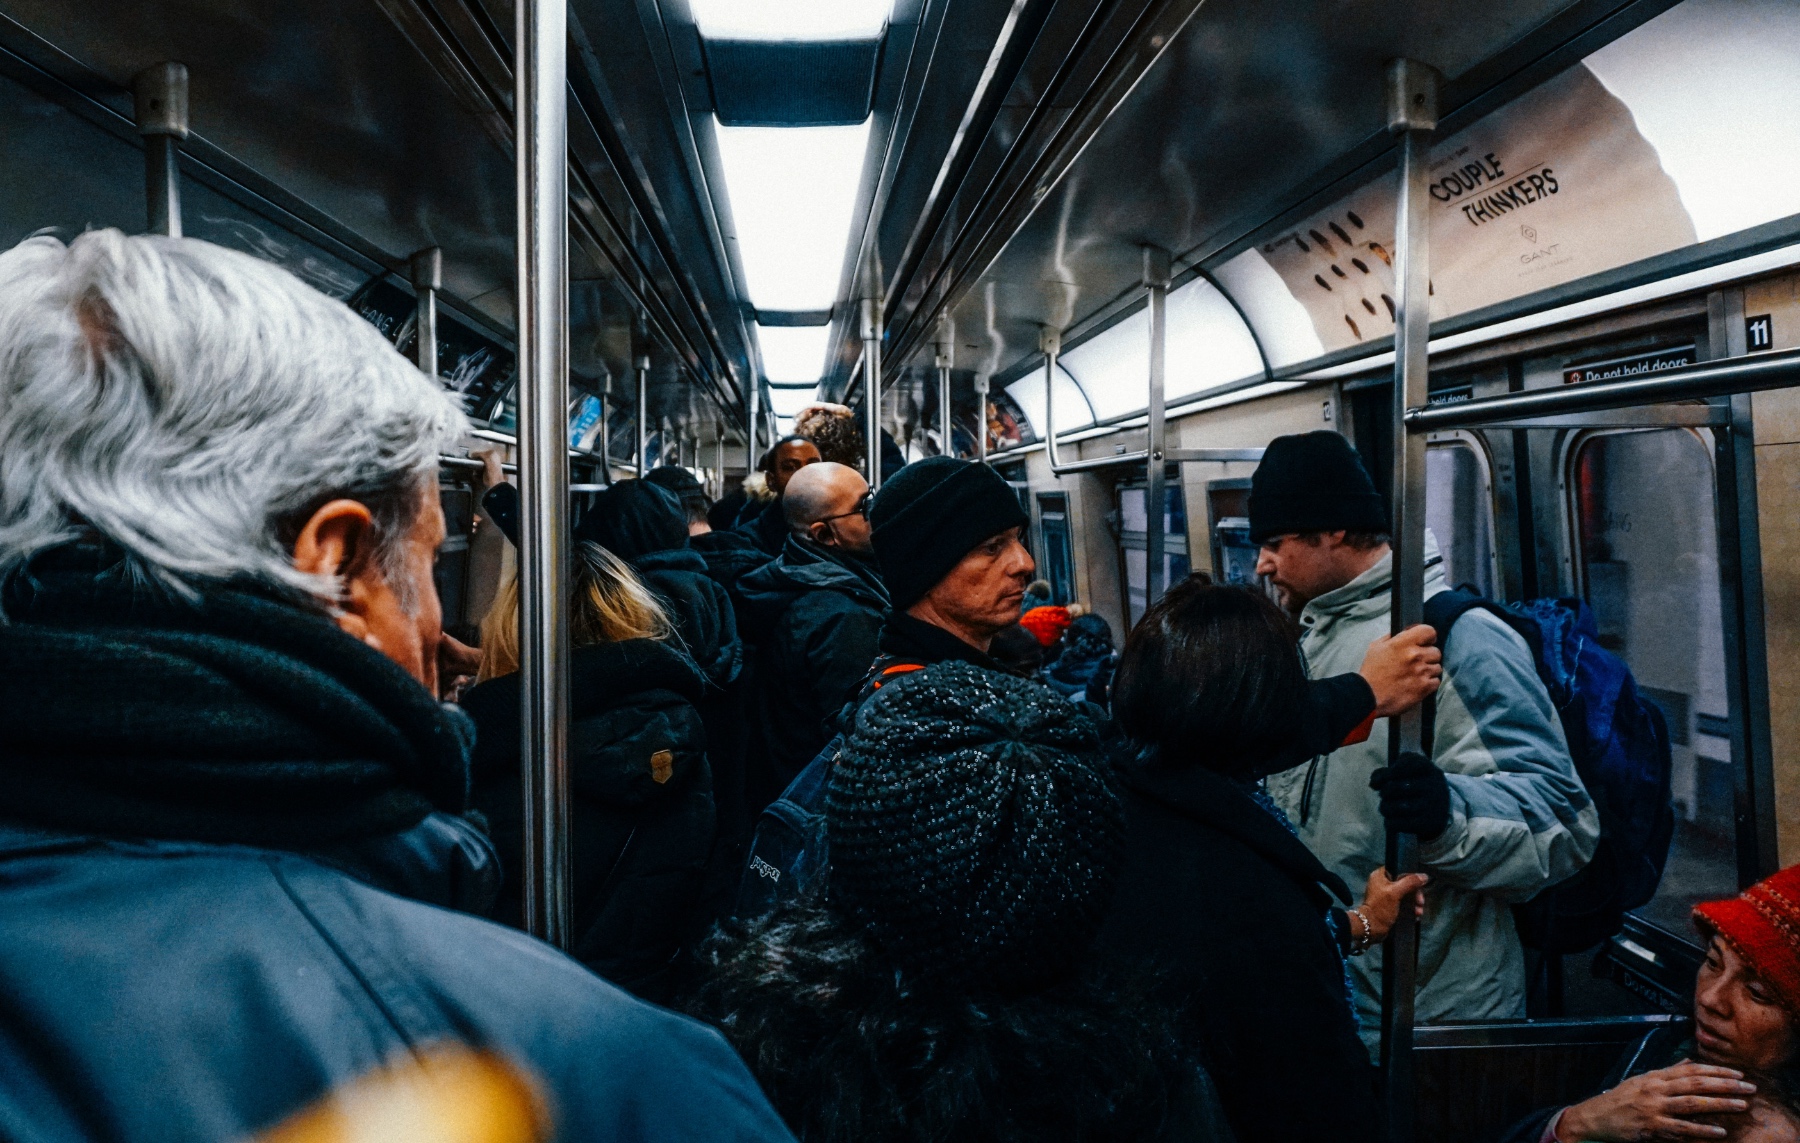 An image of a bunch of people crammed into a subway car